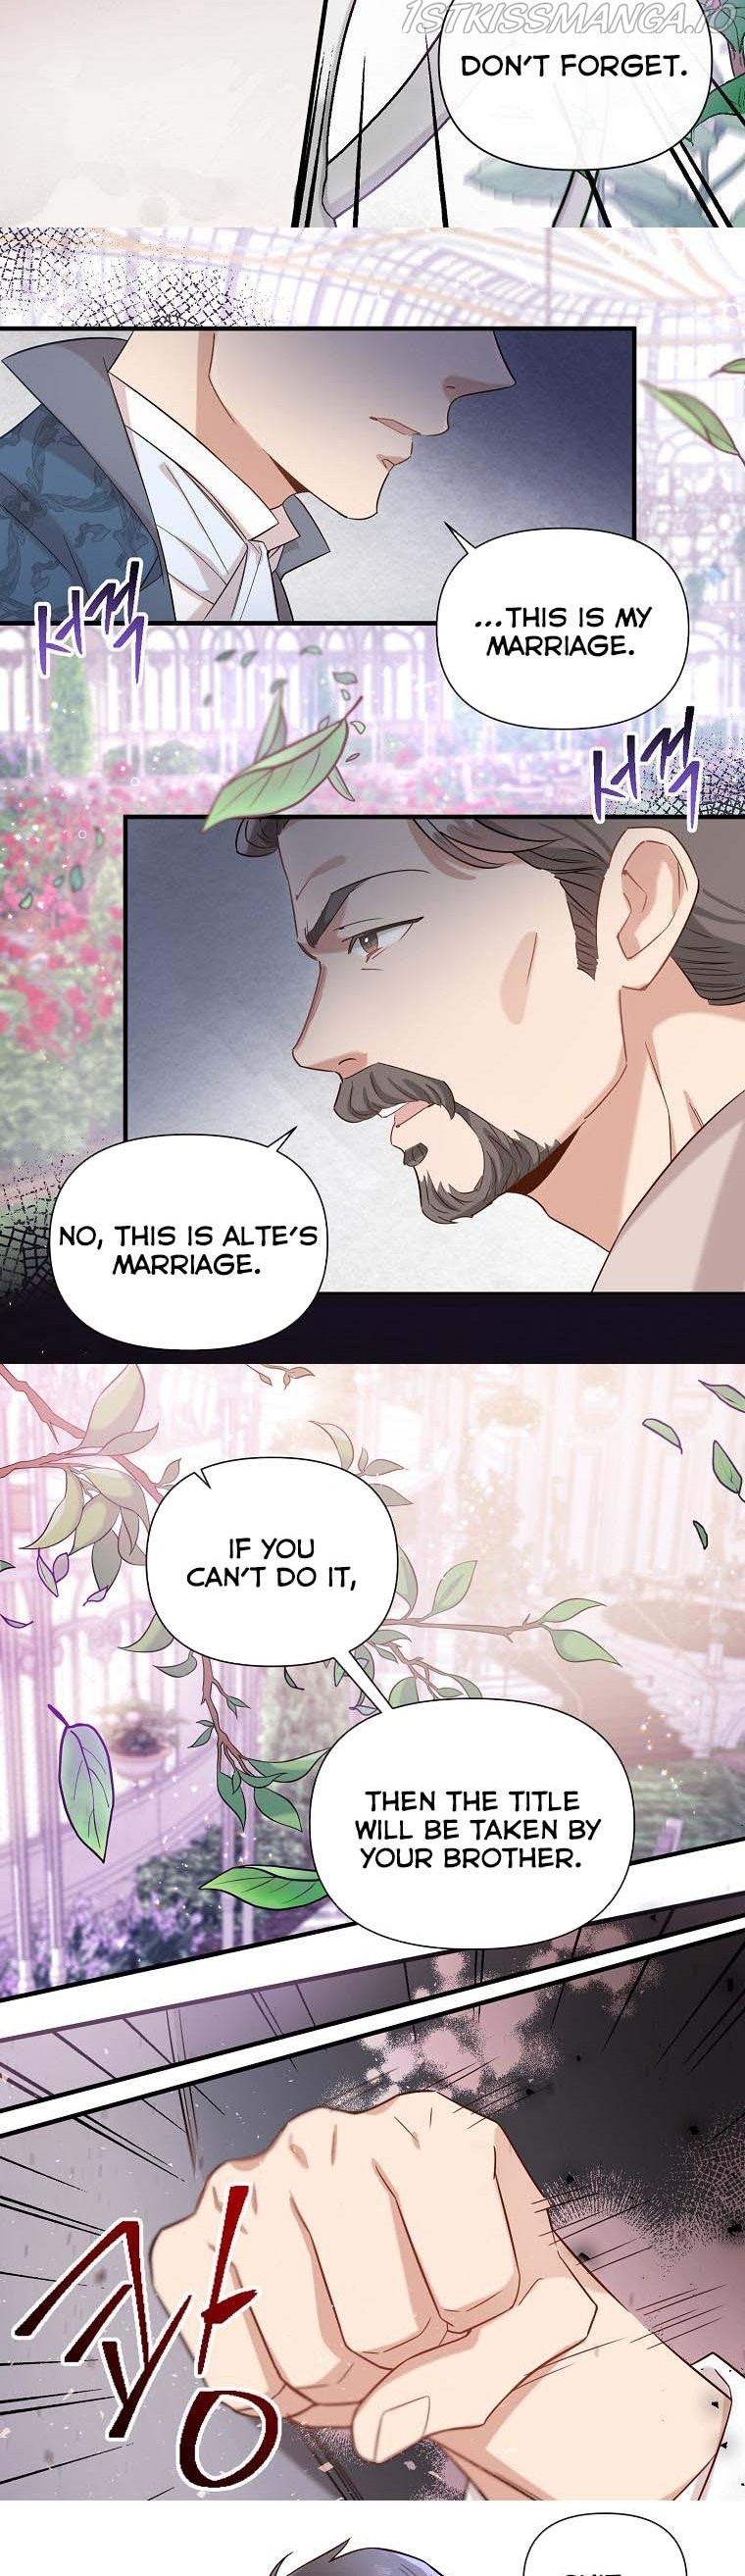 Marriage B - Page 4